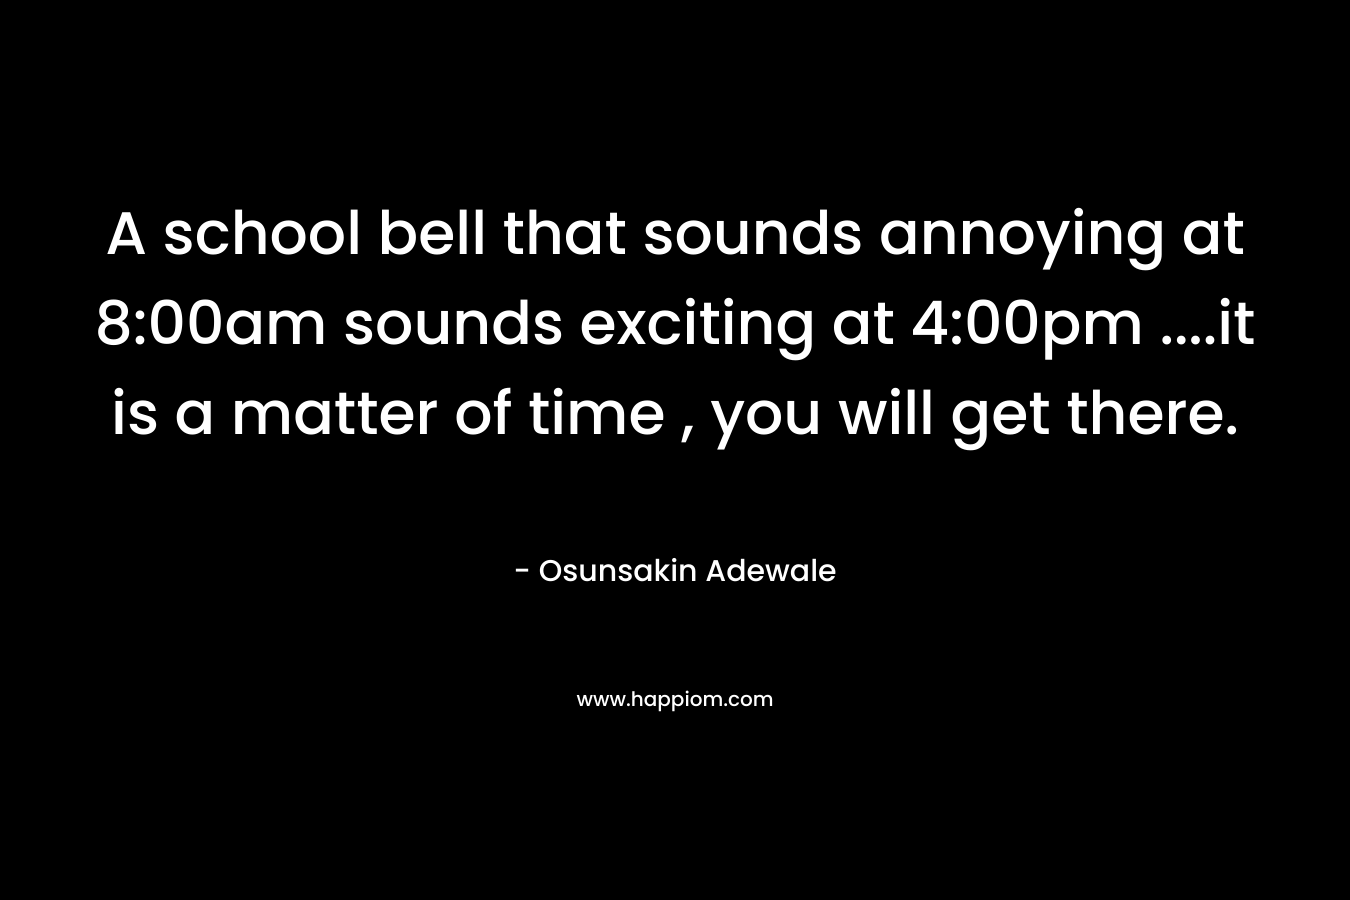 A school bell that sounds annoying at 8:00am sounds exciting at 4:00pm ….it is a matter of time , you will get there. – Osunsakin Adewale